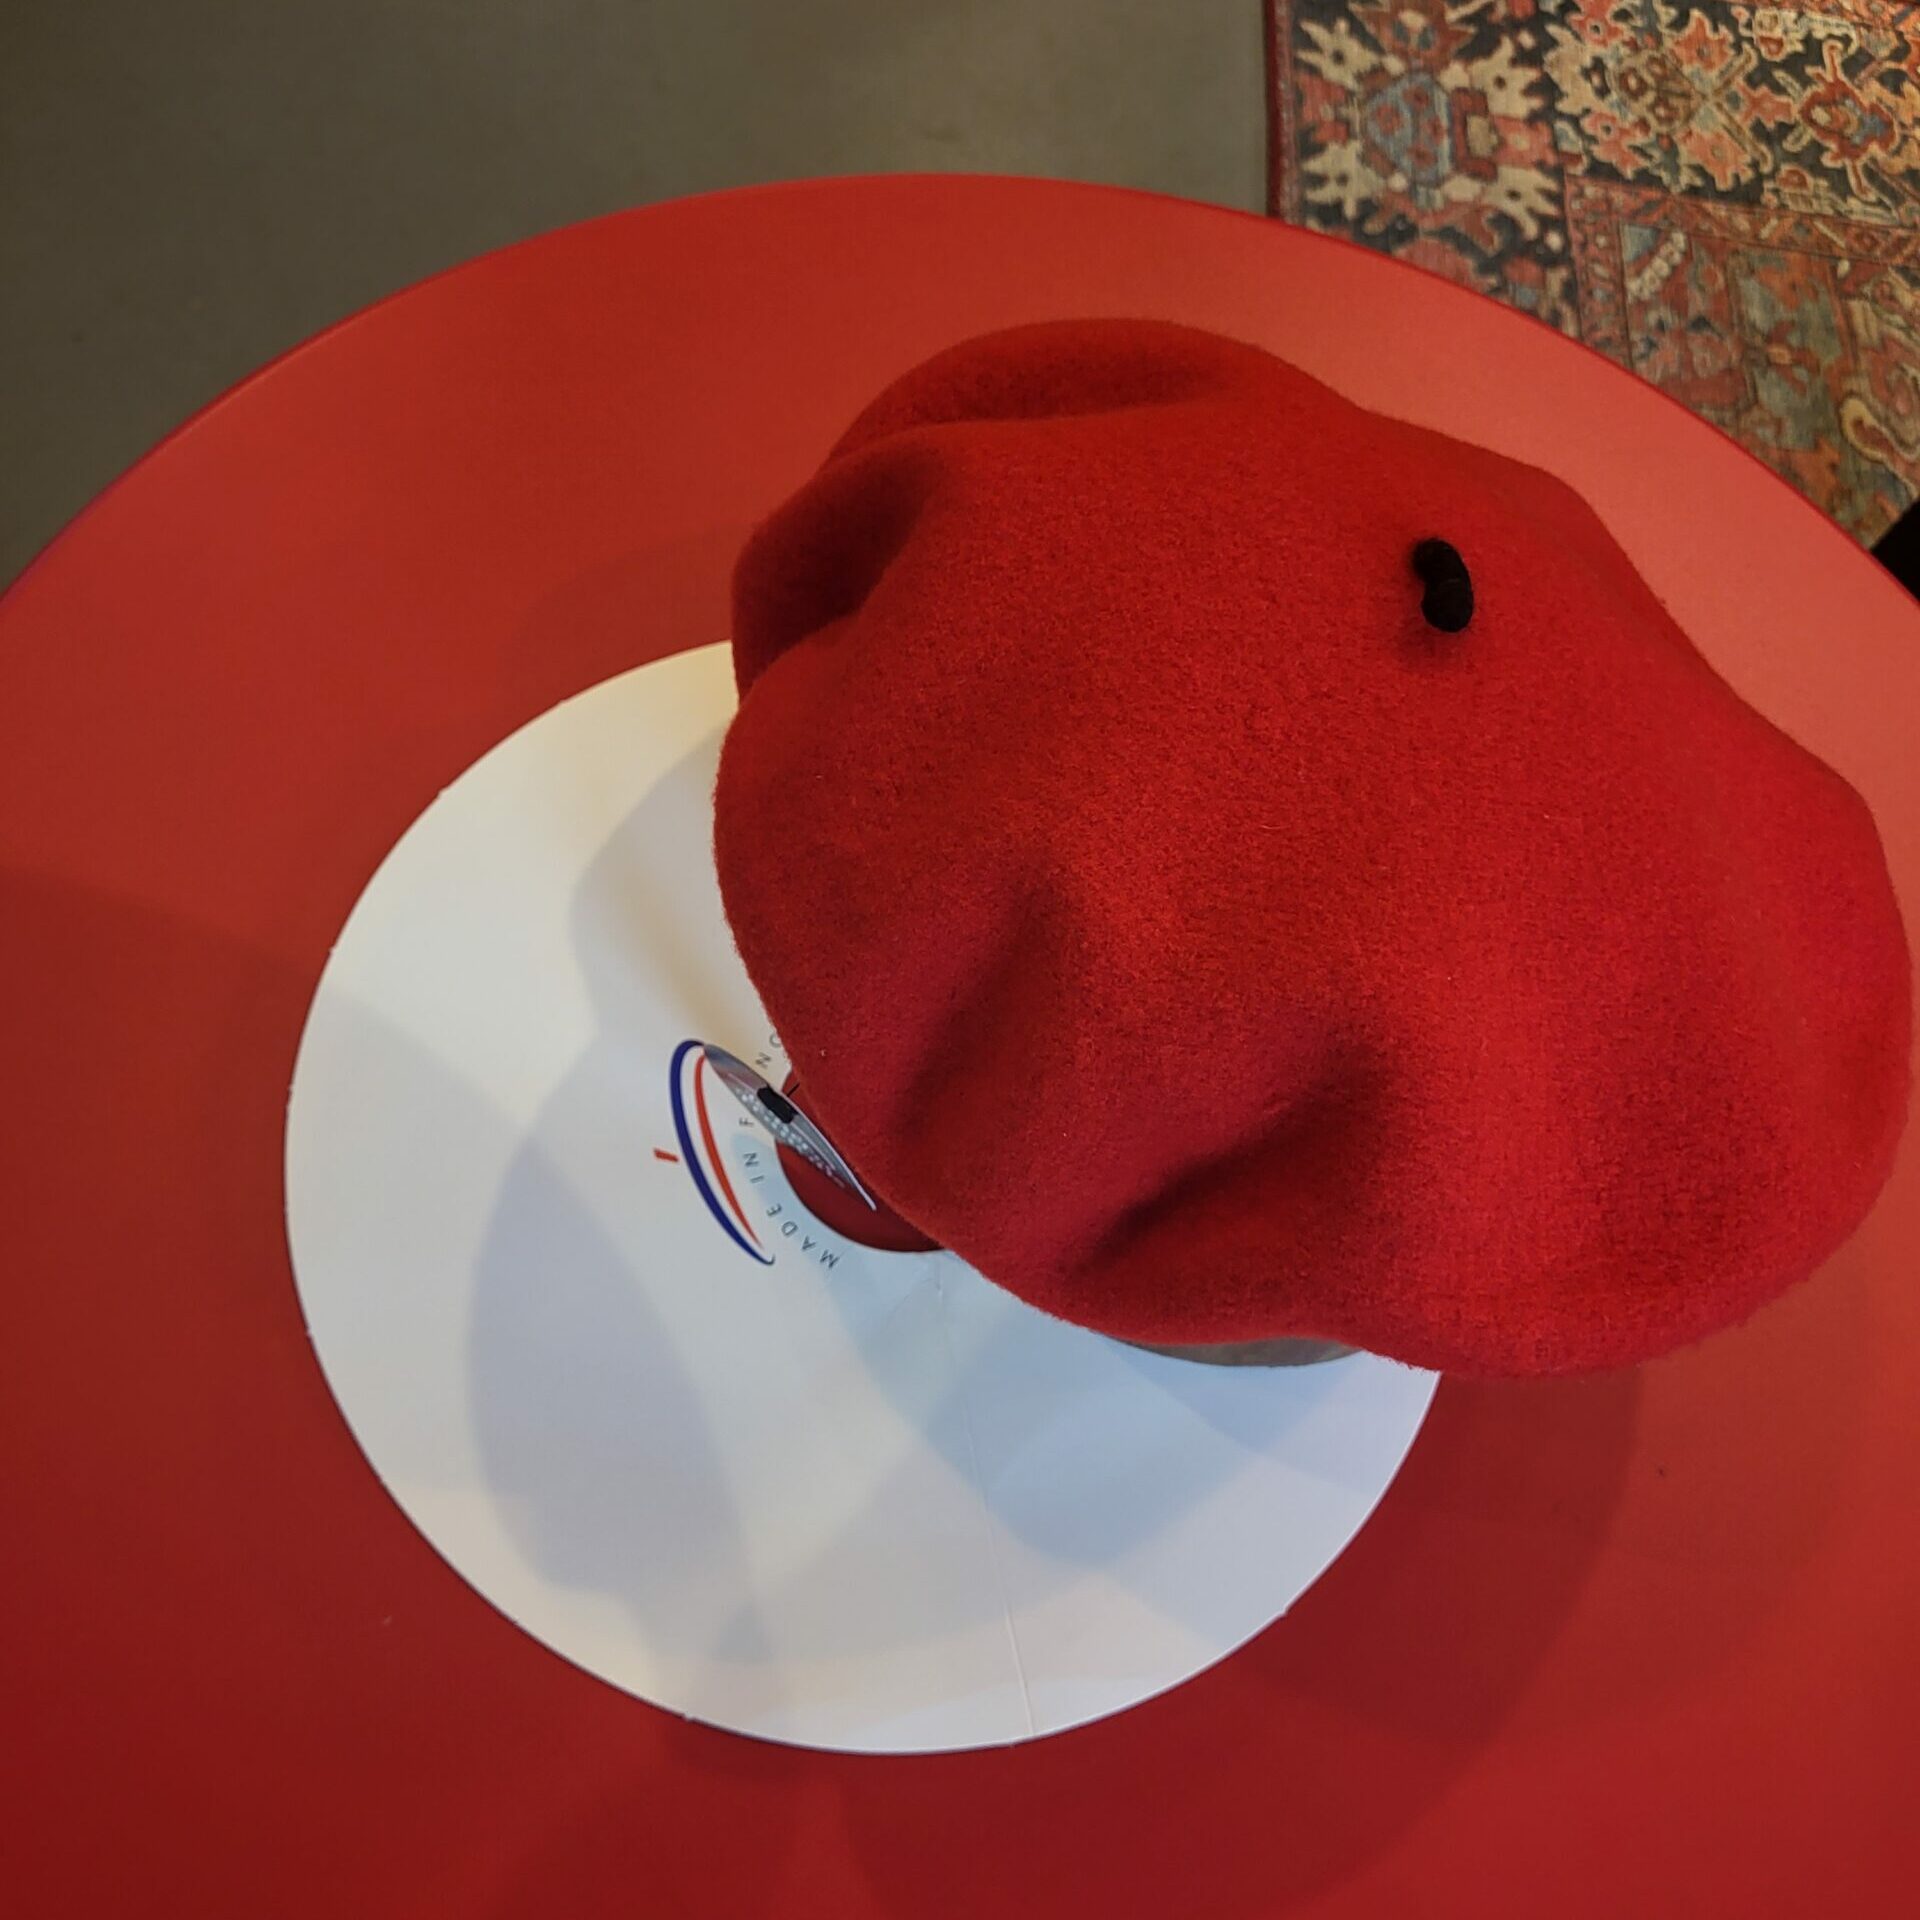 A classic red beret from eclipse hat shop on western avenue in pike place market